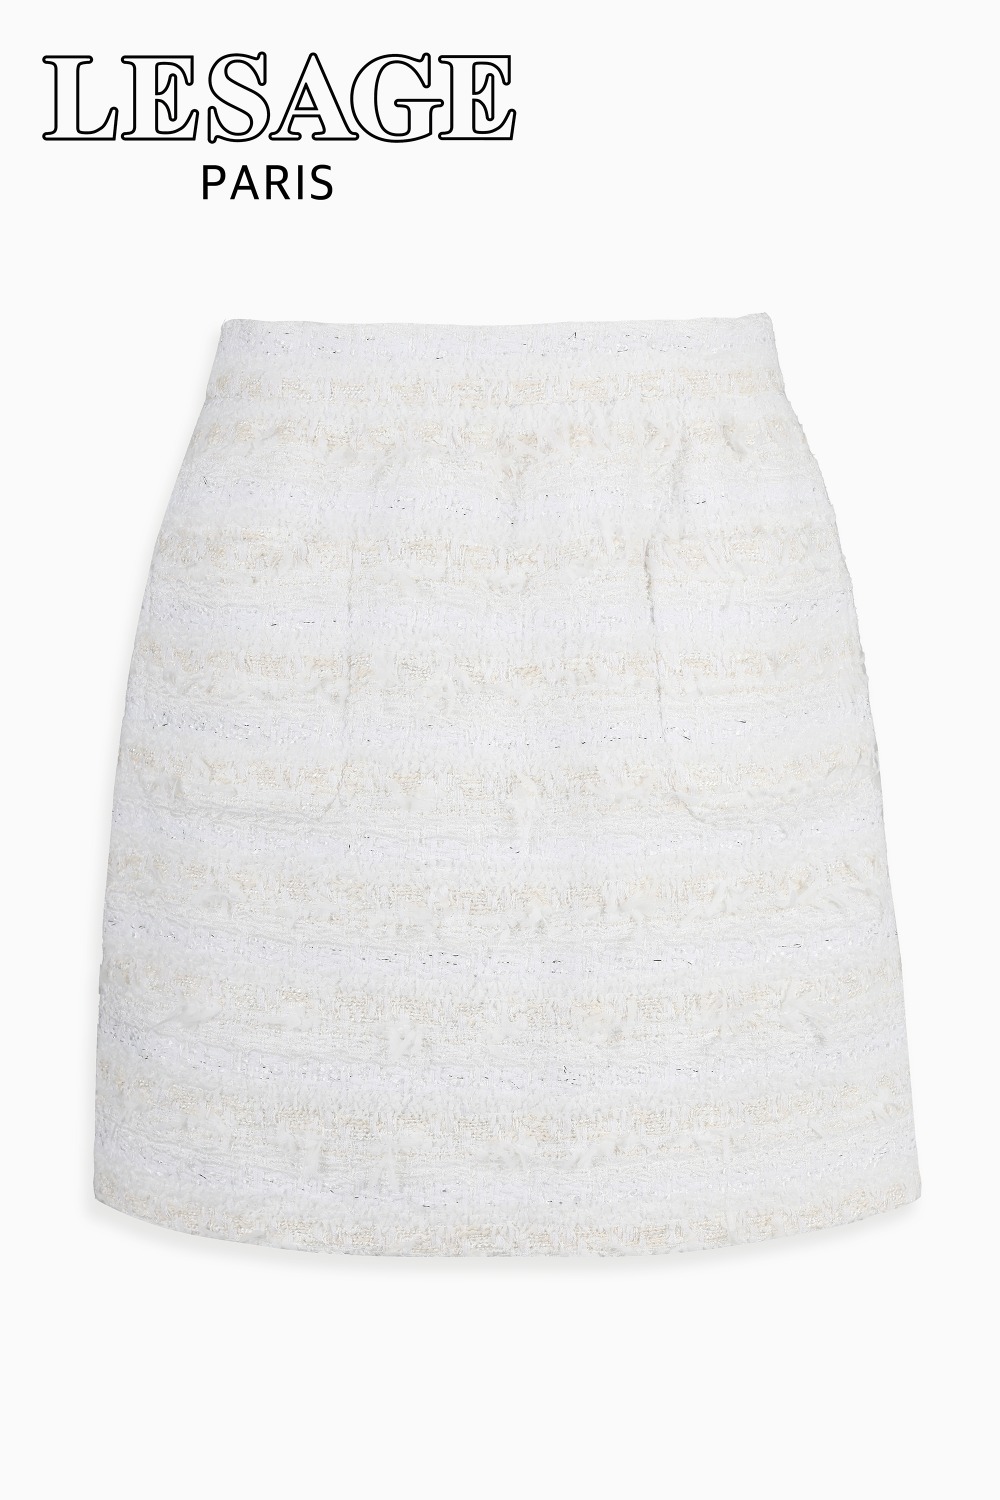 HIGH QUALITY LINE - Camellia LESAGE Tweed Mini Skirt (Fabric by LESAGE, Made in FRANCE)